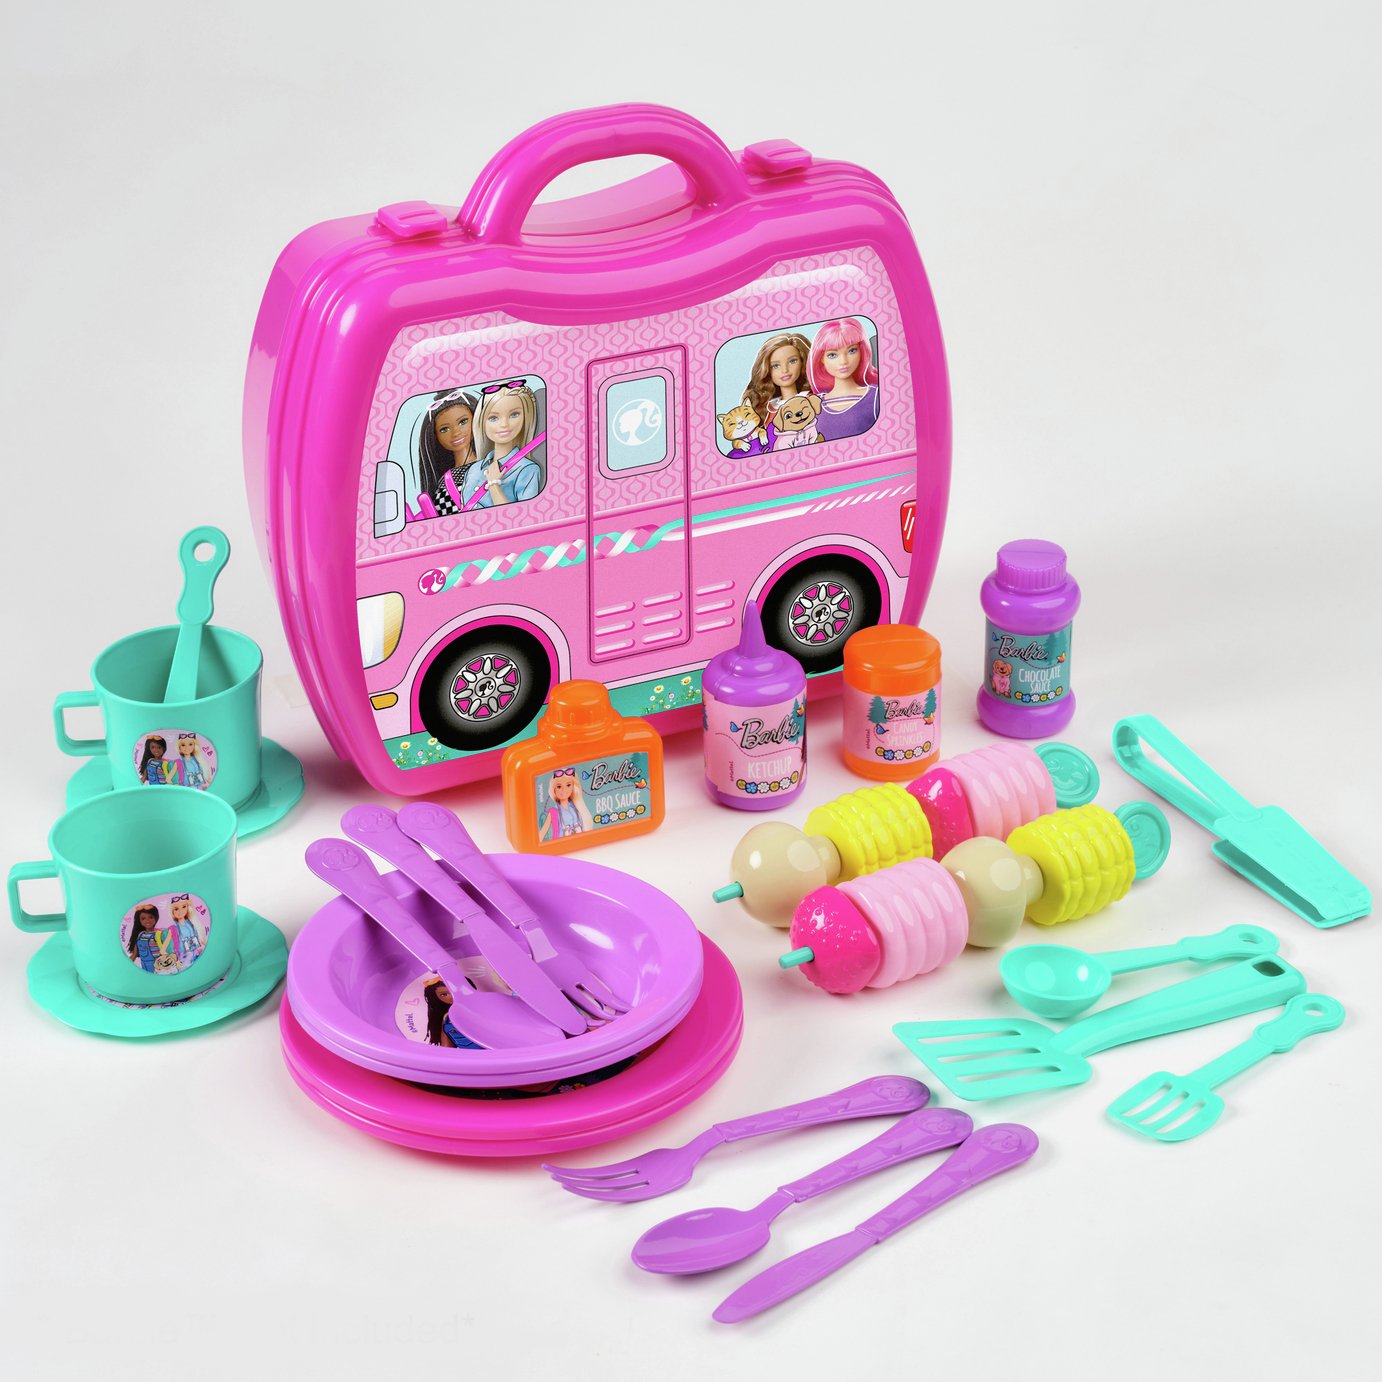 Barbie Glamping Play Set Pack 12 - 8inch/22cm